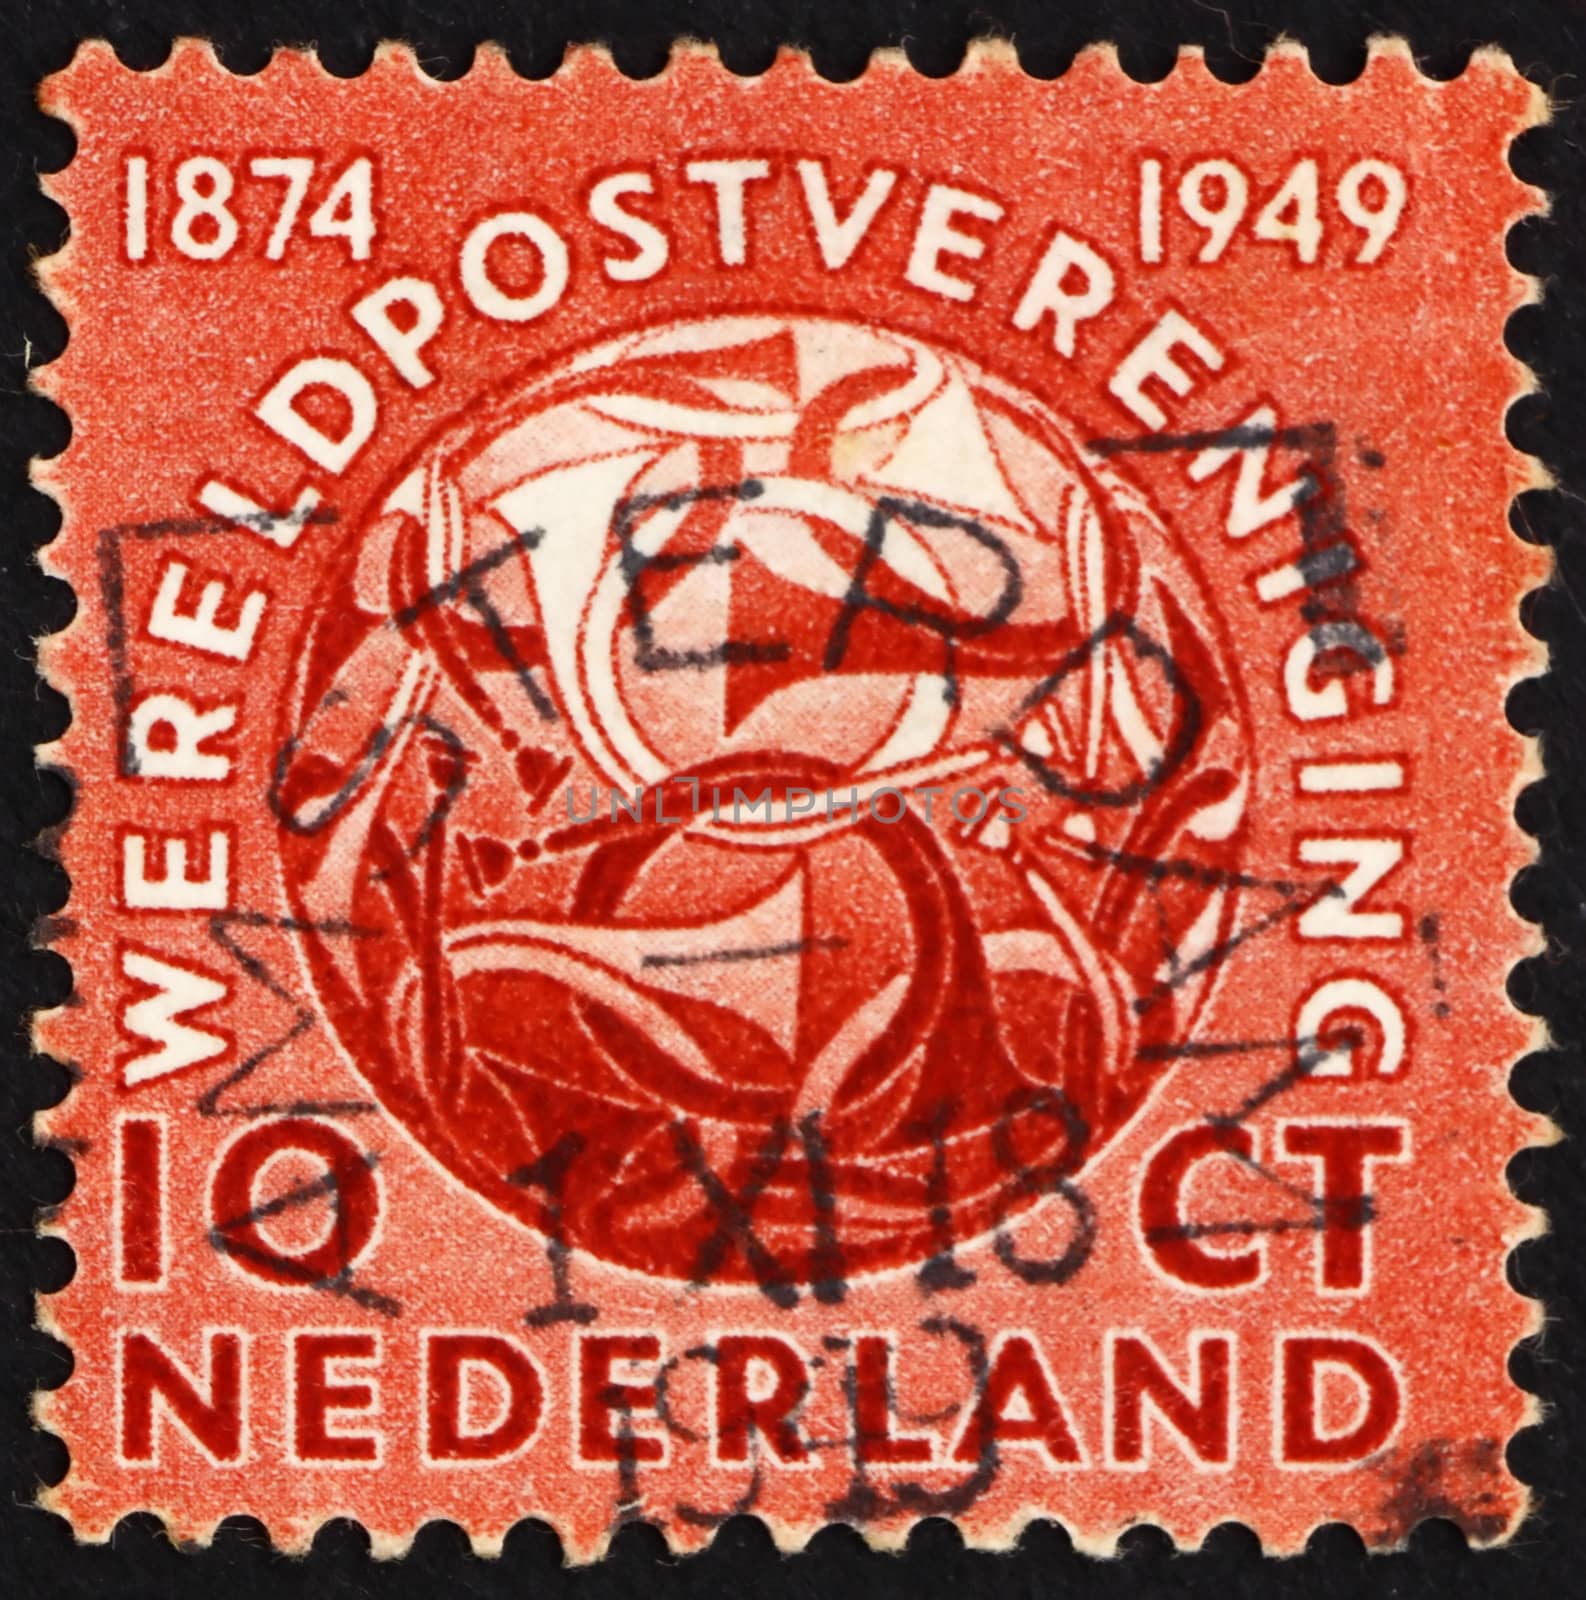 Postage stamp Netherlands 1949 Post Horns Entwined by Boris15